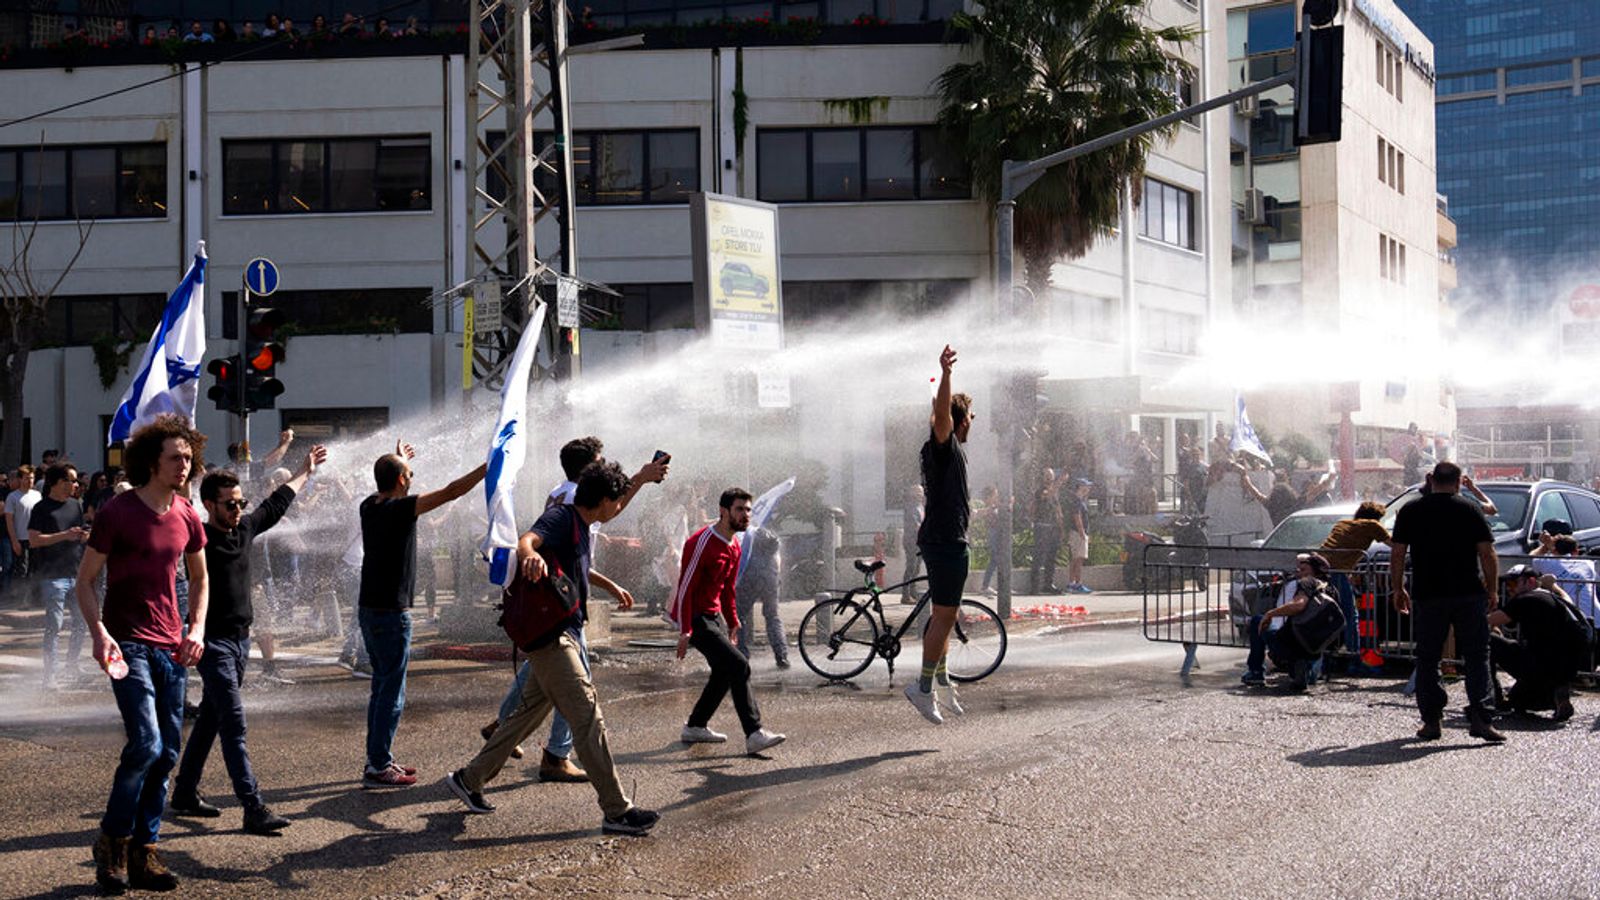 Israel's Benjamin Netanyahu criticises anti-government protesters in televised statement